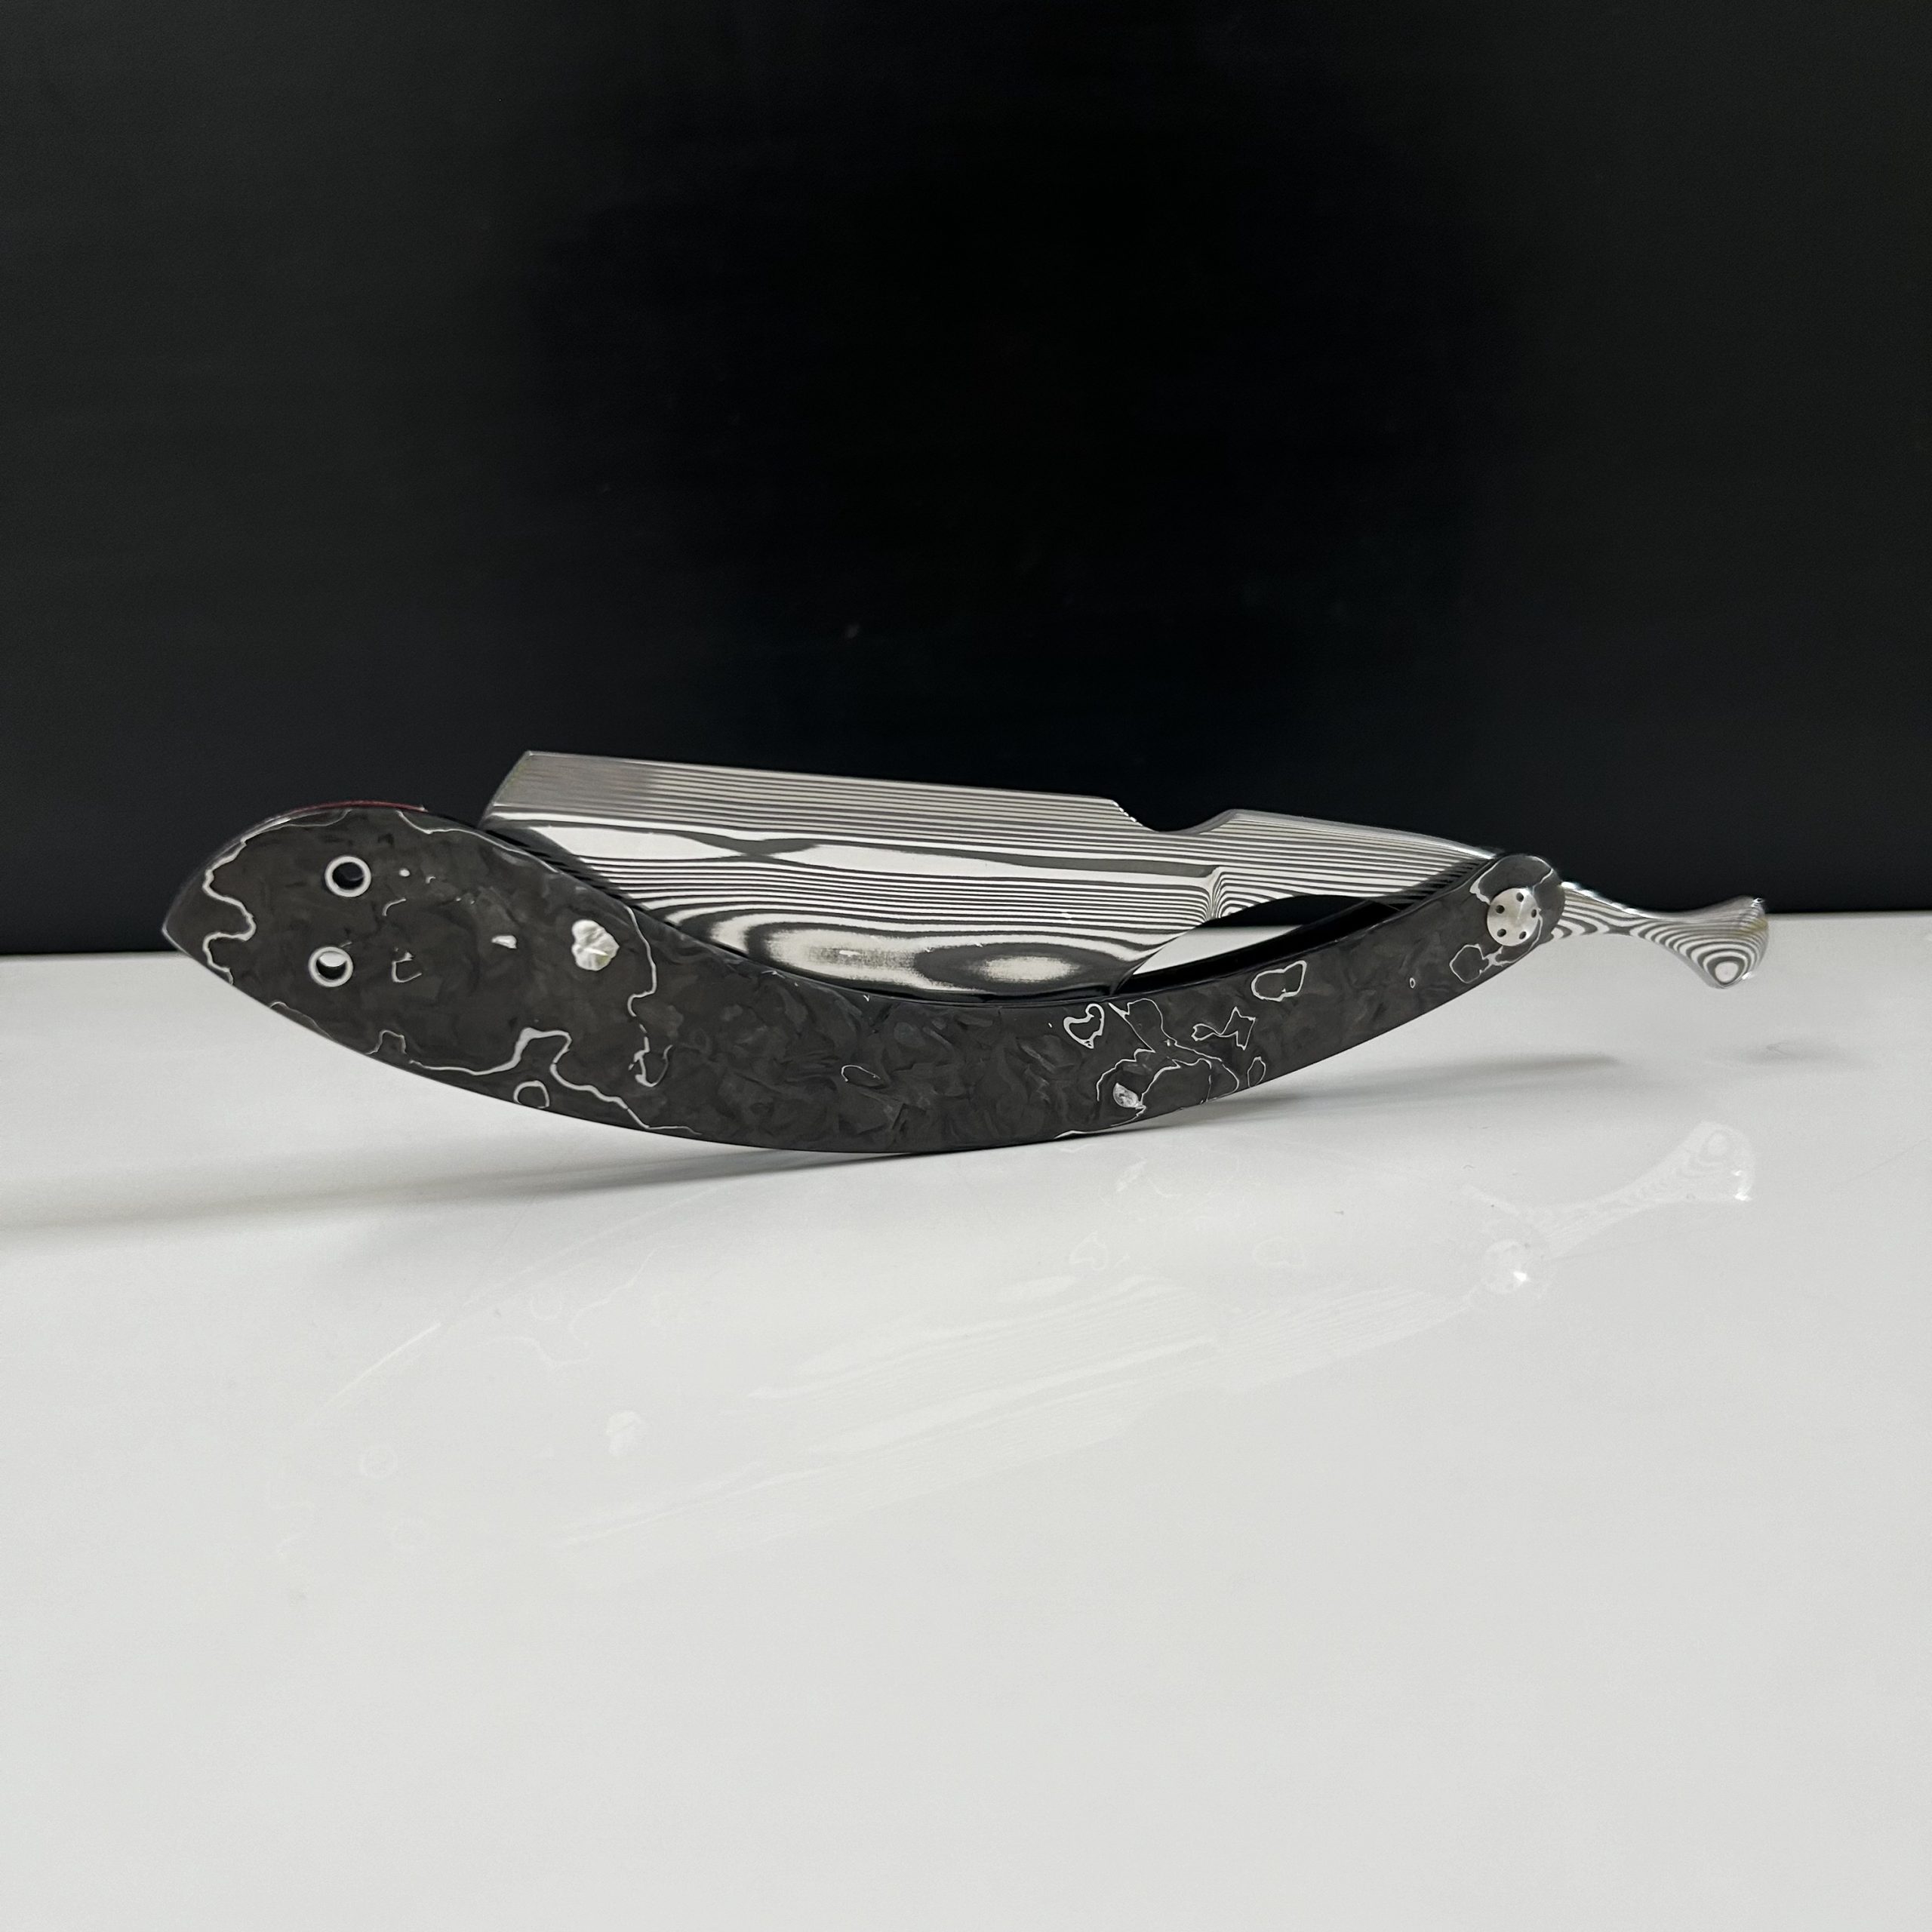 Woolfblades 390 Custom Made in a Parallel pattern Damasteel with a full hollow grind 7/8 straight edge.And the scales are made in a carbon fibre with pattern and carbon fibre inlays the wedge  on this razor is made in 25 grams of non tarnish Sterling Silver.